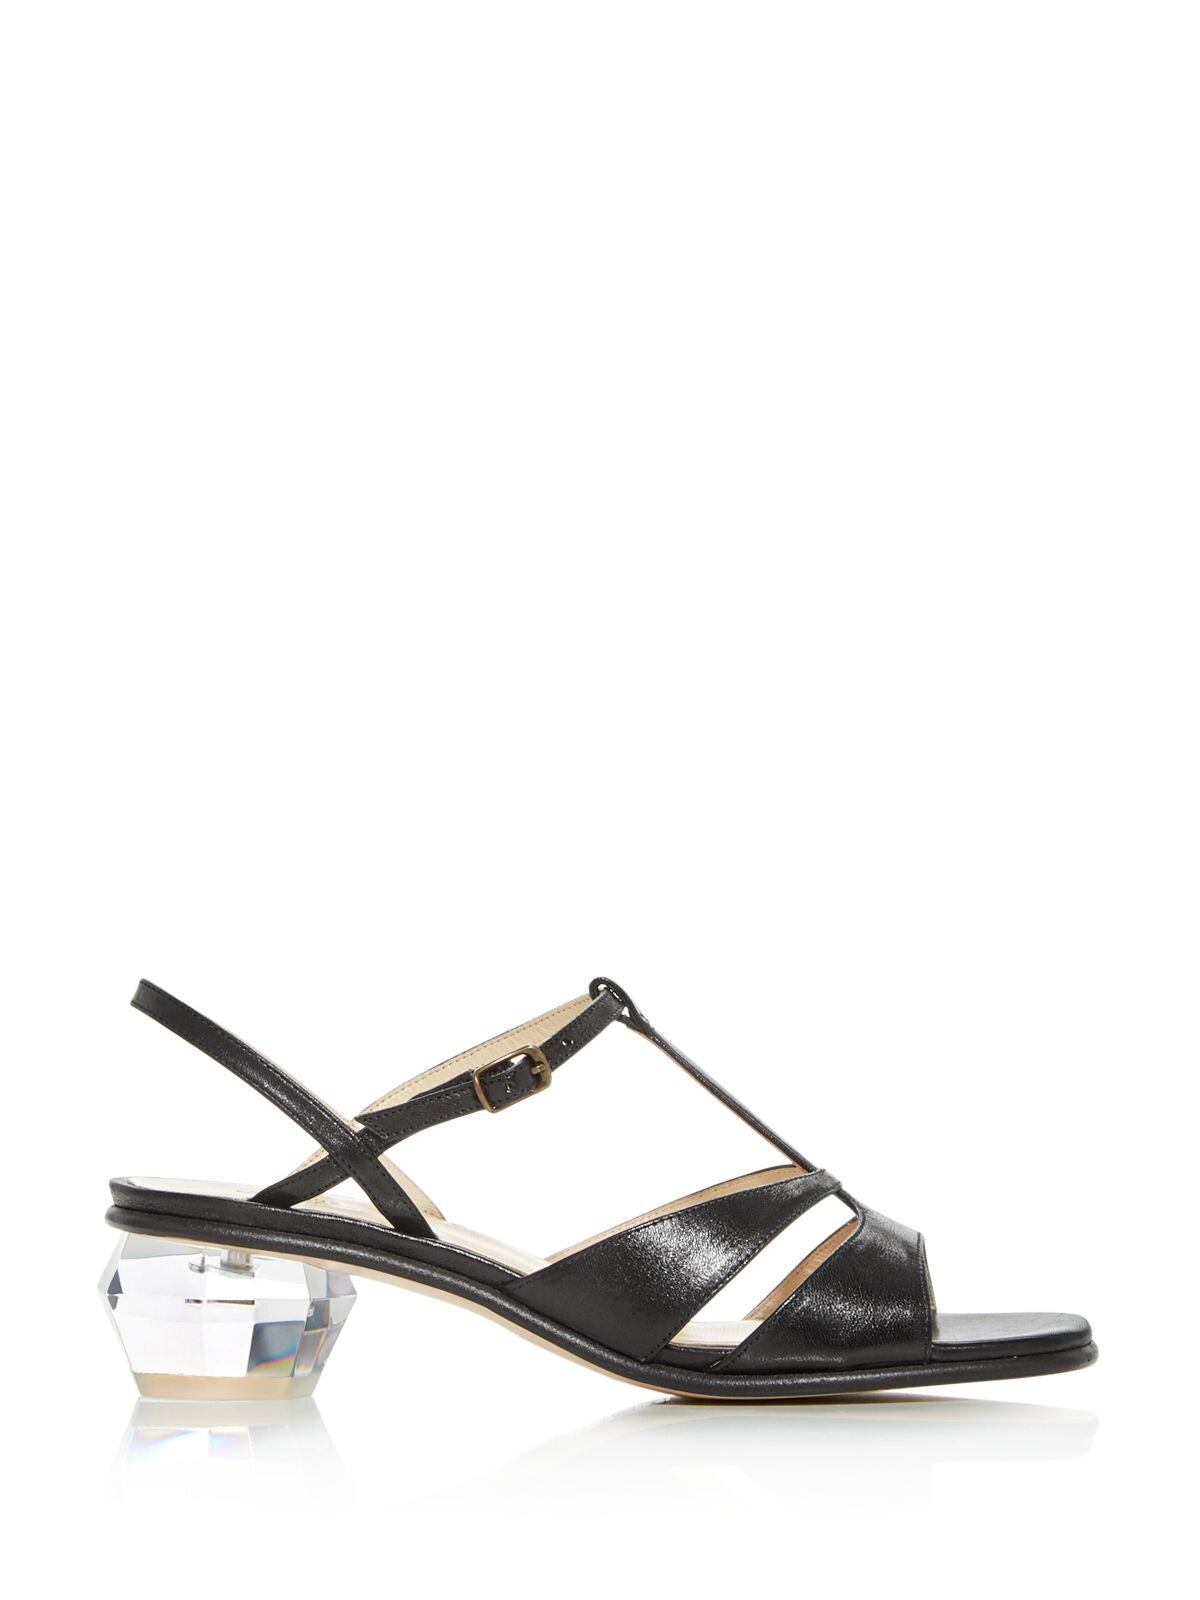 MARC JACOBS Womens Black T-Strap Strappy The Gem Square Toe Sculpted Heel Buckle Leather Slingback Sandal 41